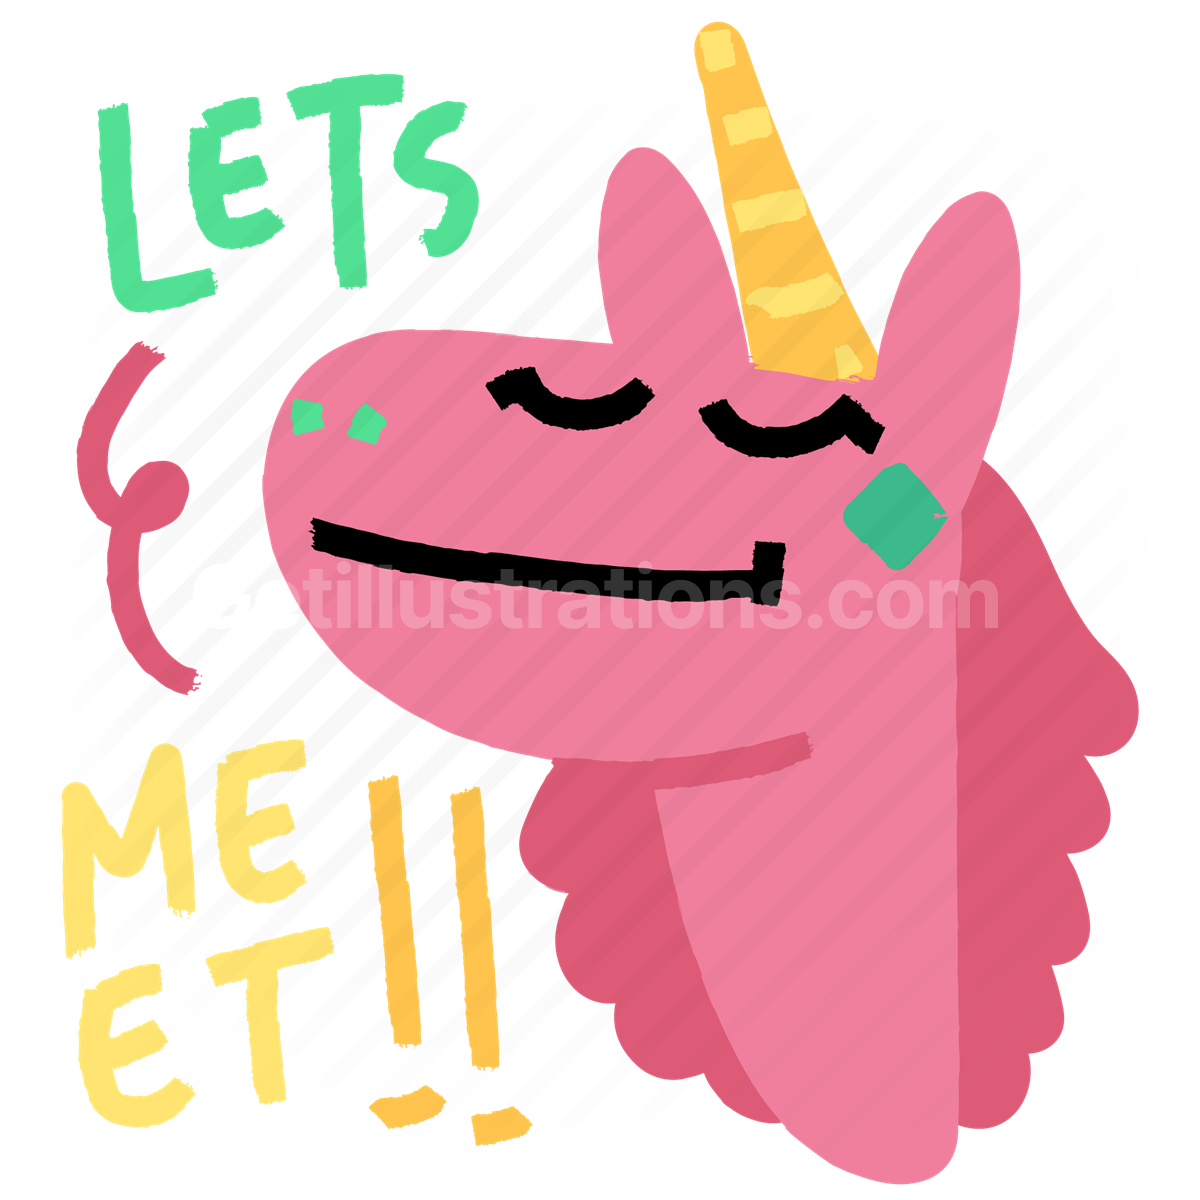 unicorn, sticker, character, lets meet, greeting, smile